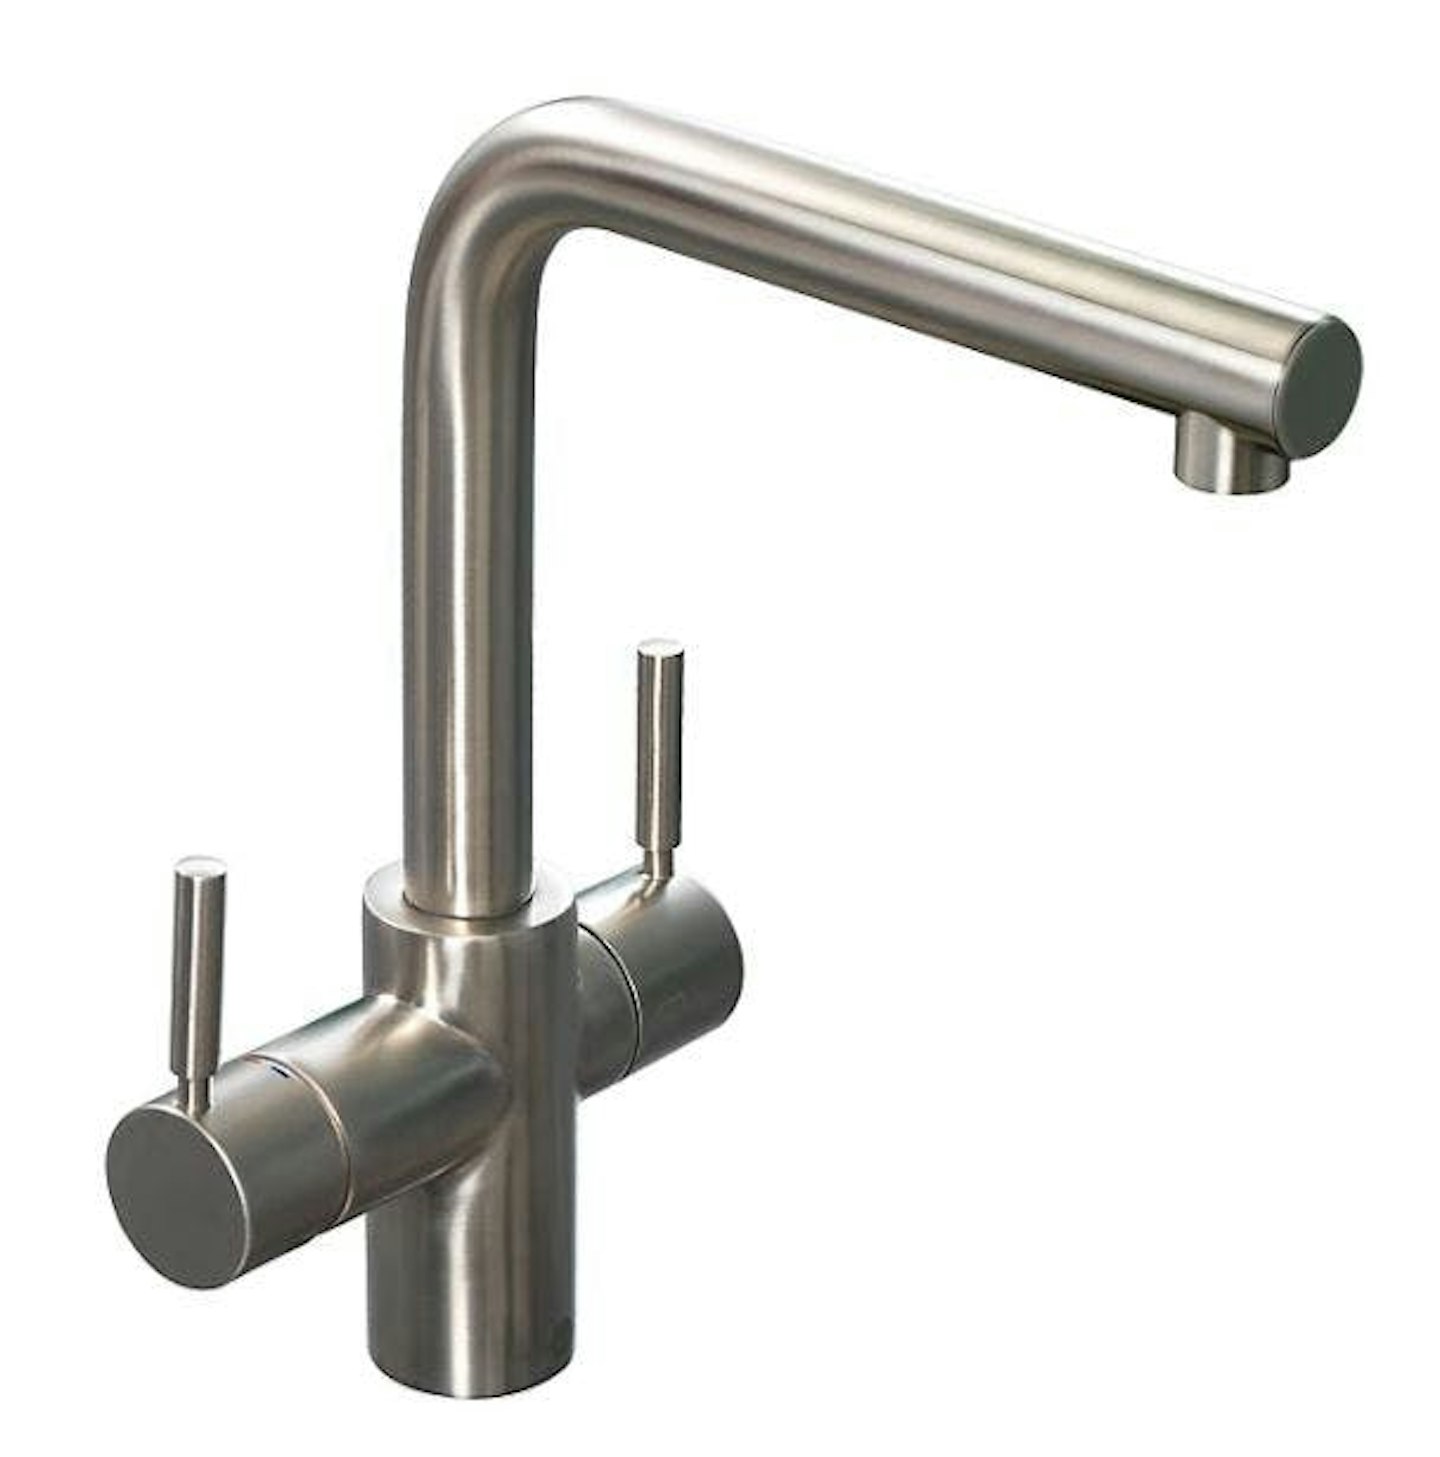 Best boiling water taps: InSinkErator 3N1 Stainless Steel Effect Filtered Steaming, Hot and Cold Water Tap